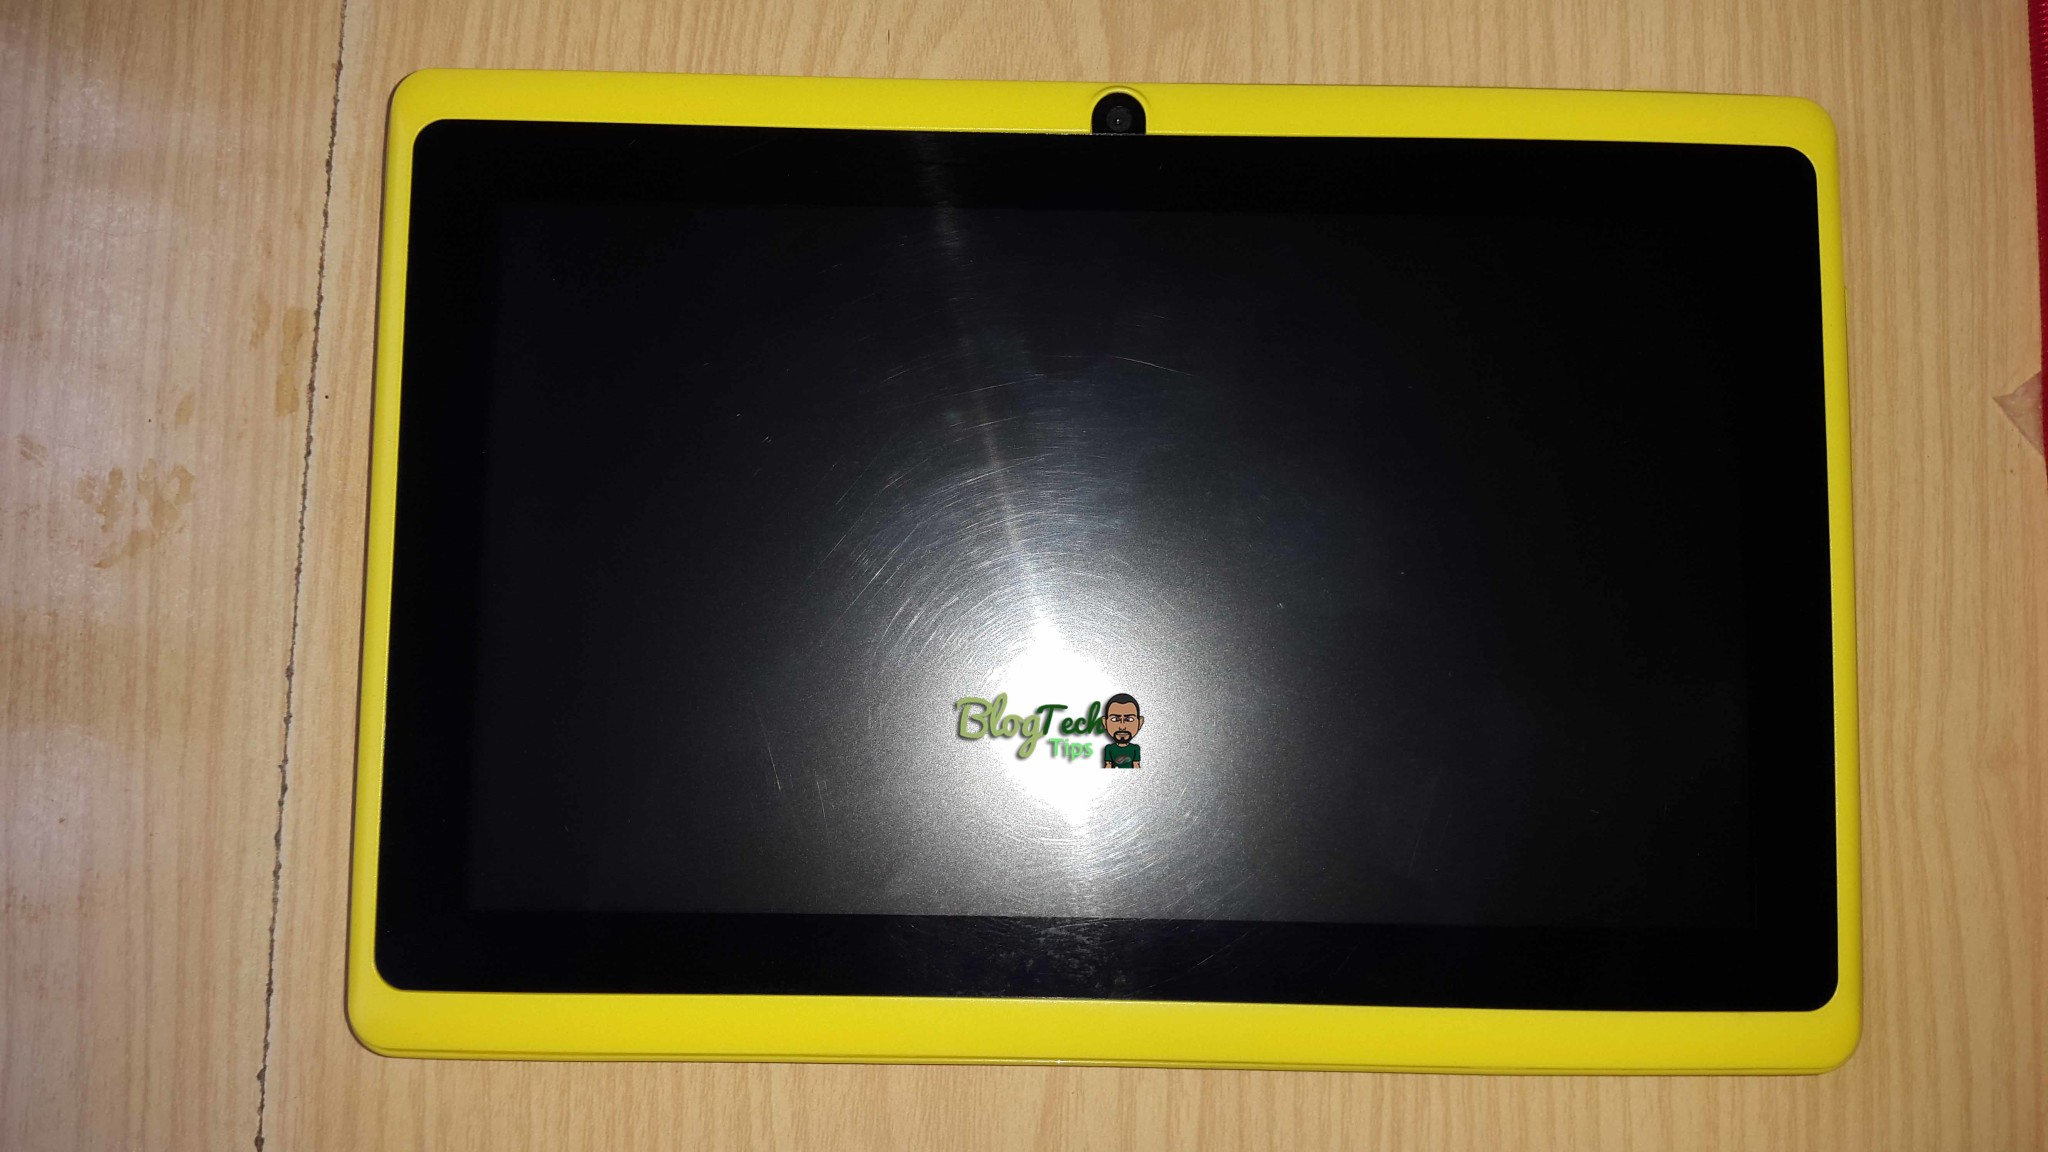 How To Find Your Chinese Tablet Firmware Or Flash File Using Board Images, Photos, Reviews